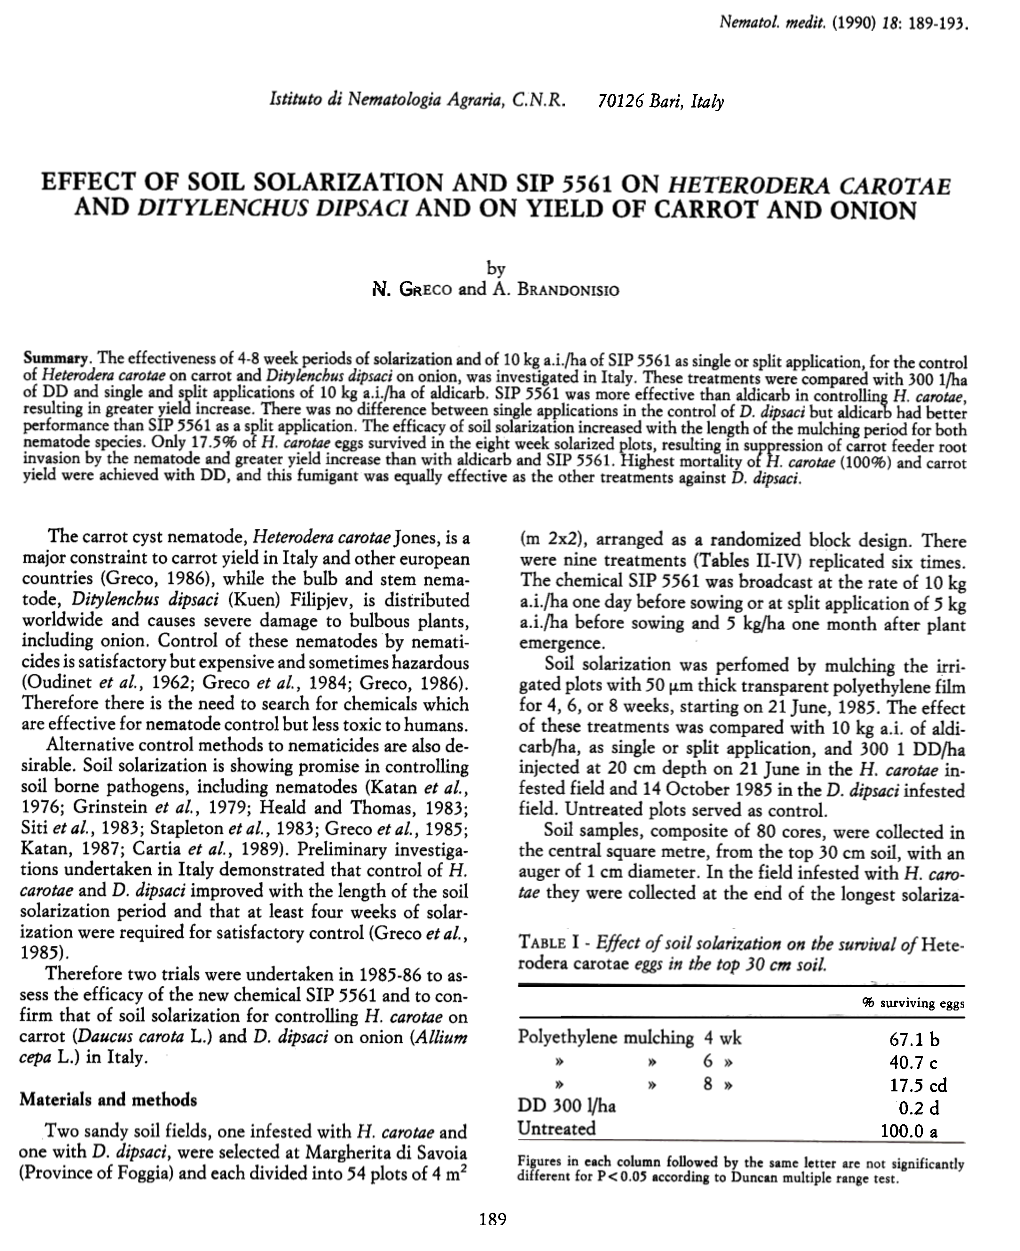 Effect of Soil Solarization and Sip 5561 on Heteroderacarotae and Ditylenchusdipsaci and on Yield of Carrot and Onion